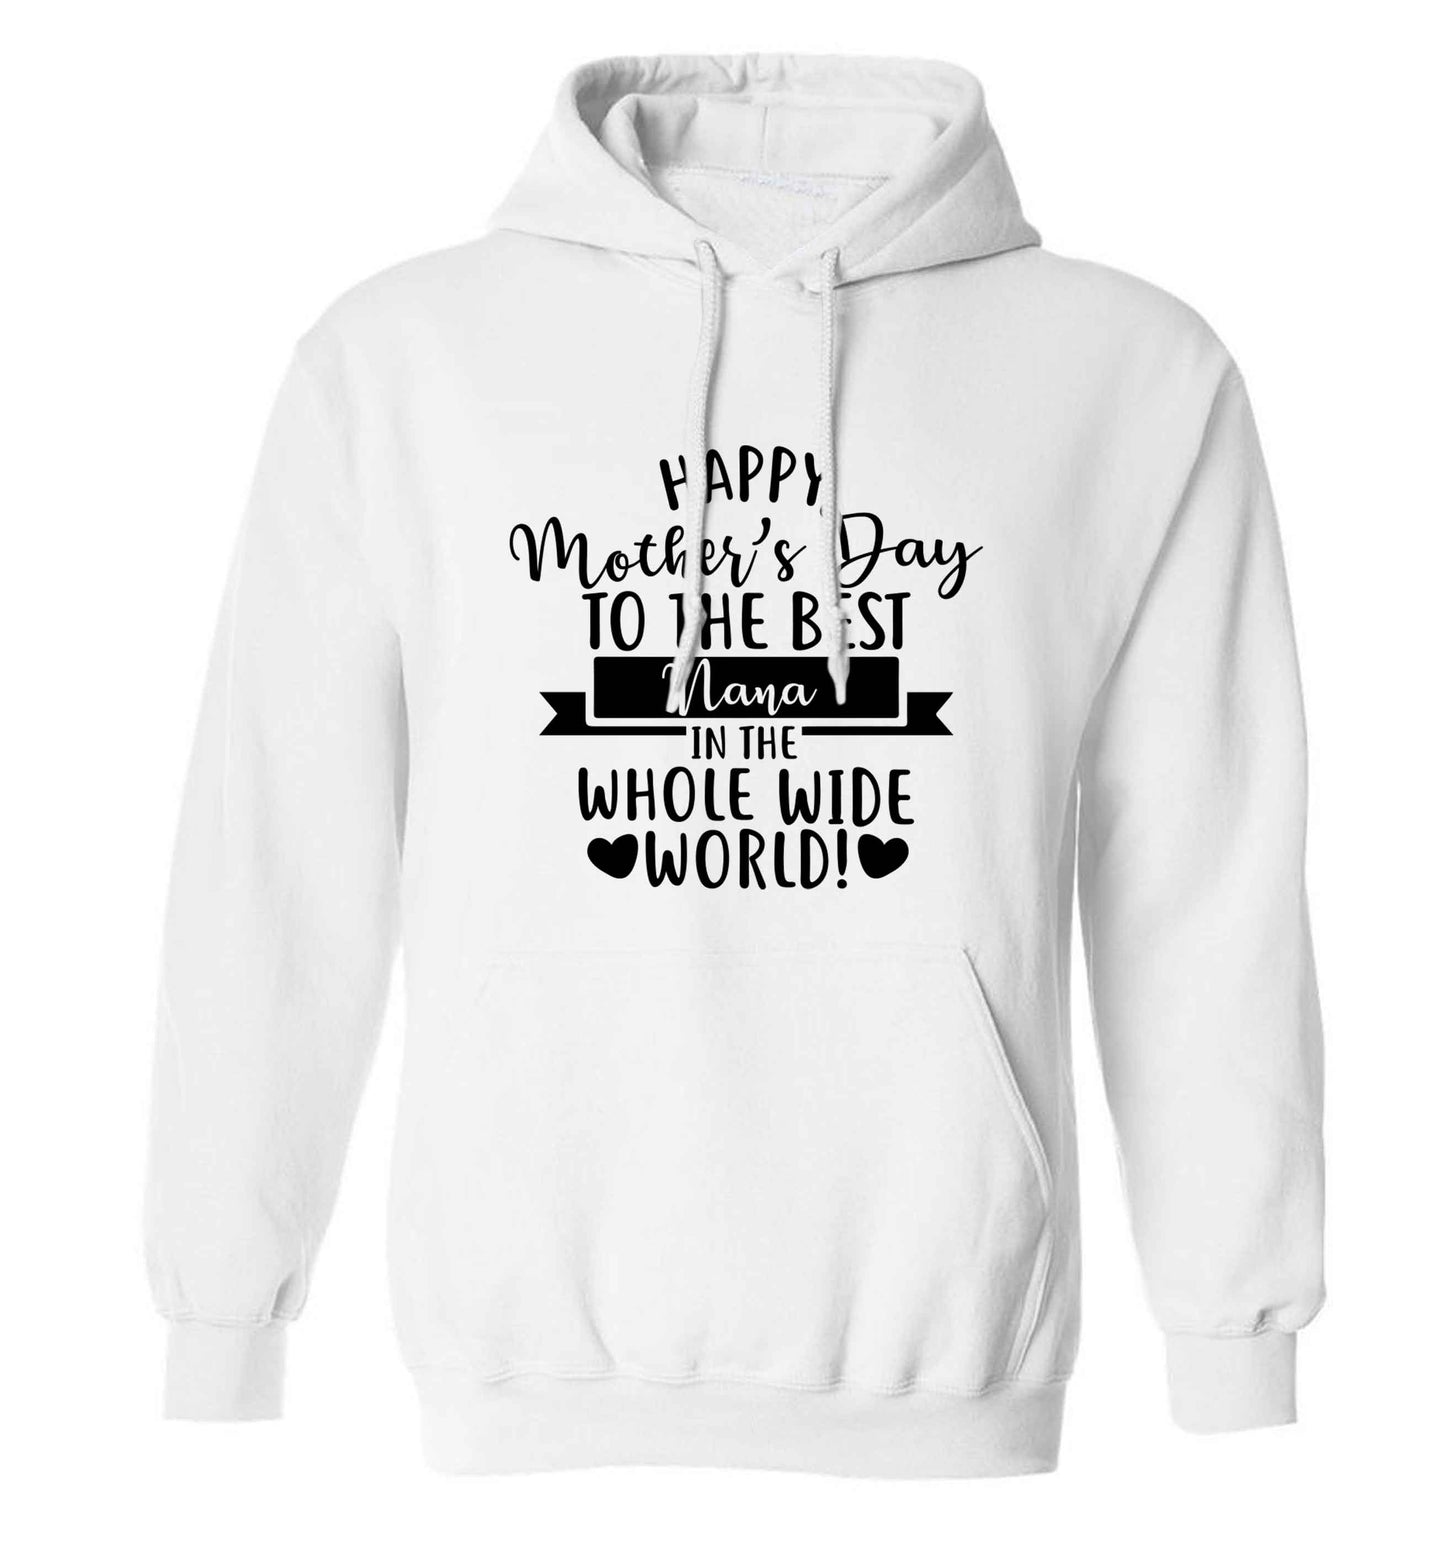 Happy mother's day to the best nana in the world adults unisex white hoodie 2XL